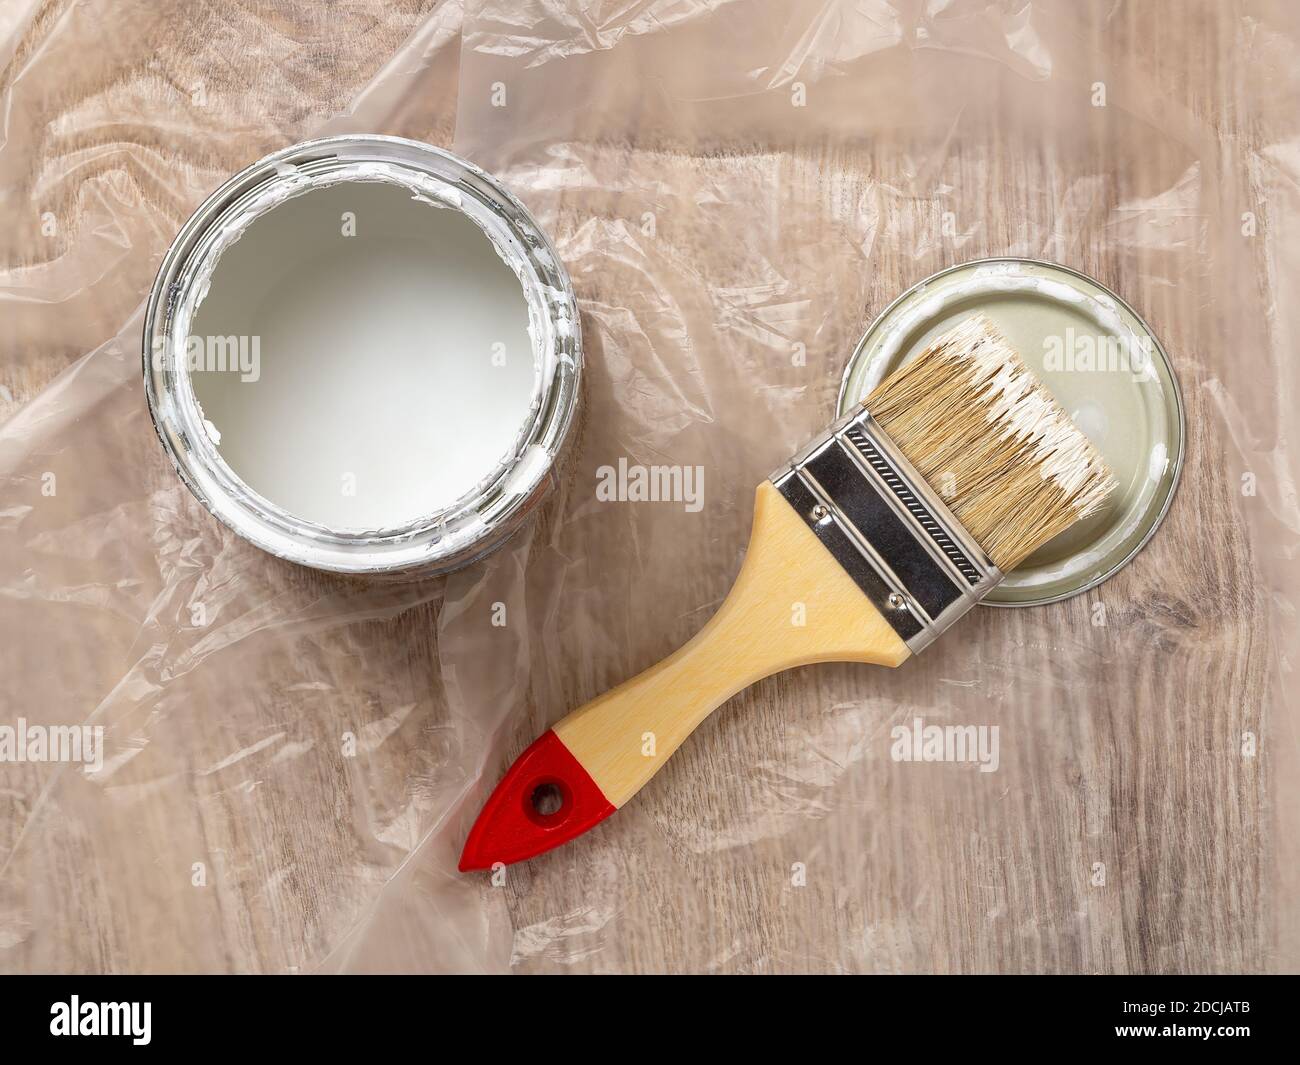 https://c8.alamy.com/comp/2DCJATB/new-natural-bristle-brush-with-paint-on-a-lid-near-an-open-paint-can-over-cellophane-covered-floor-construction-painting-work-repair-and-redecorate-2DCJATB.jpg